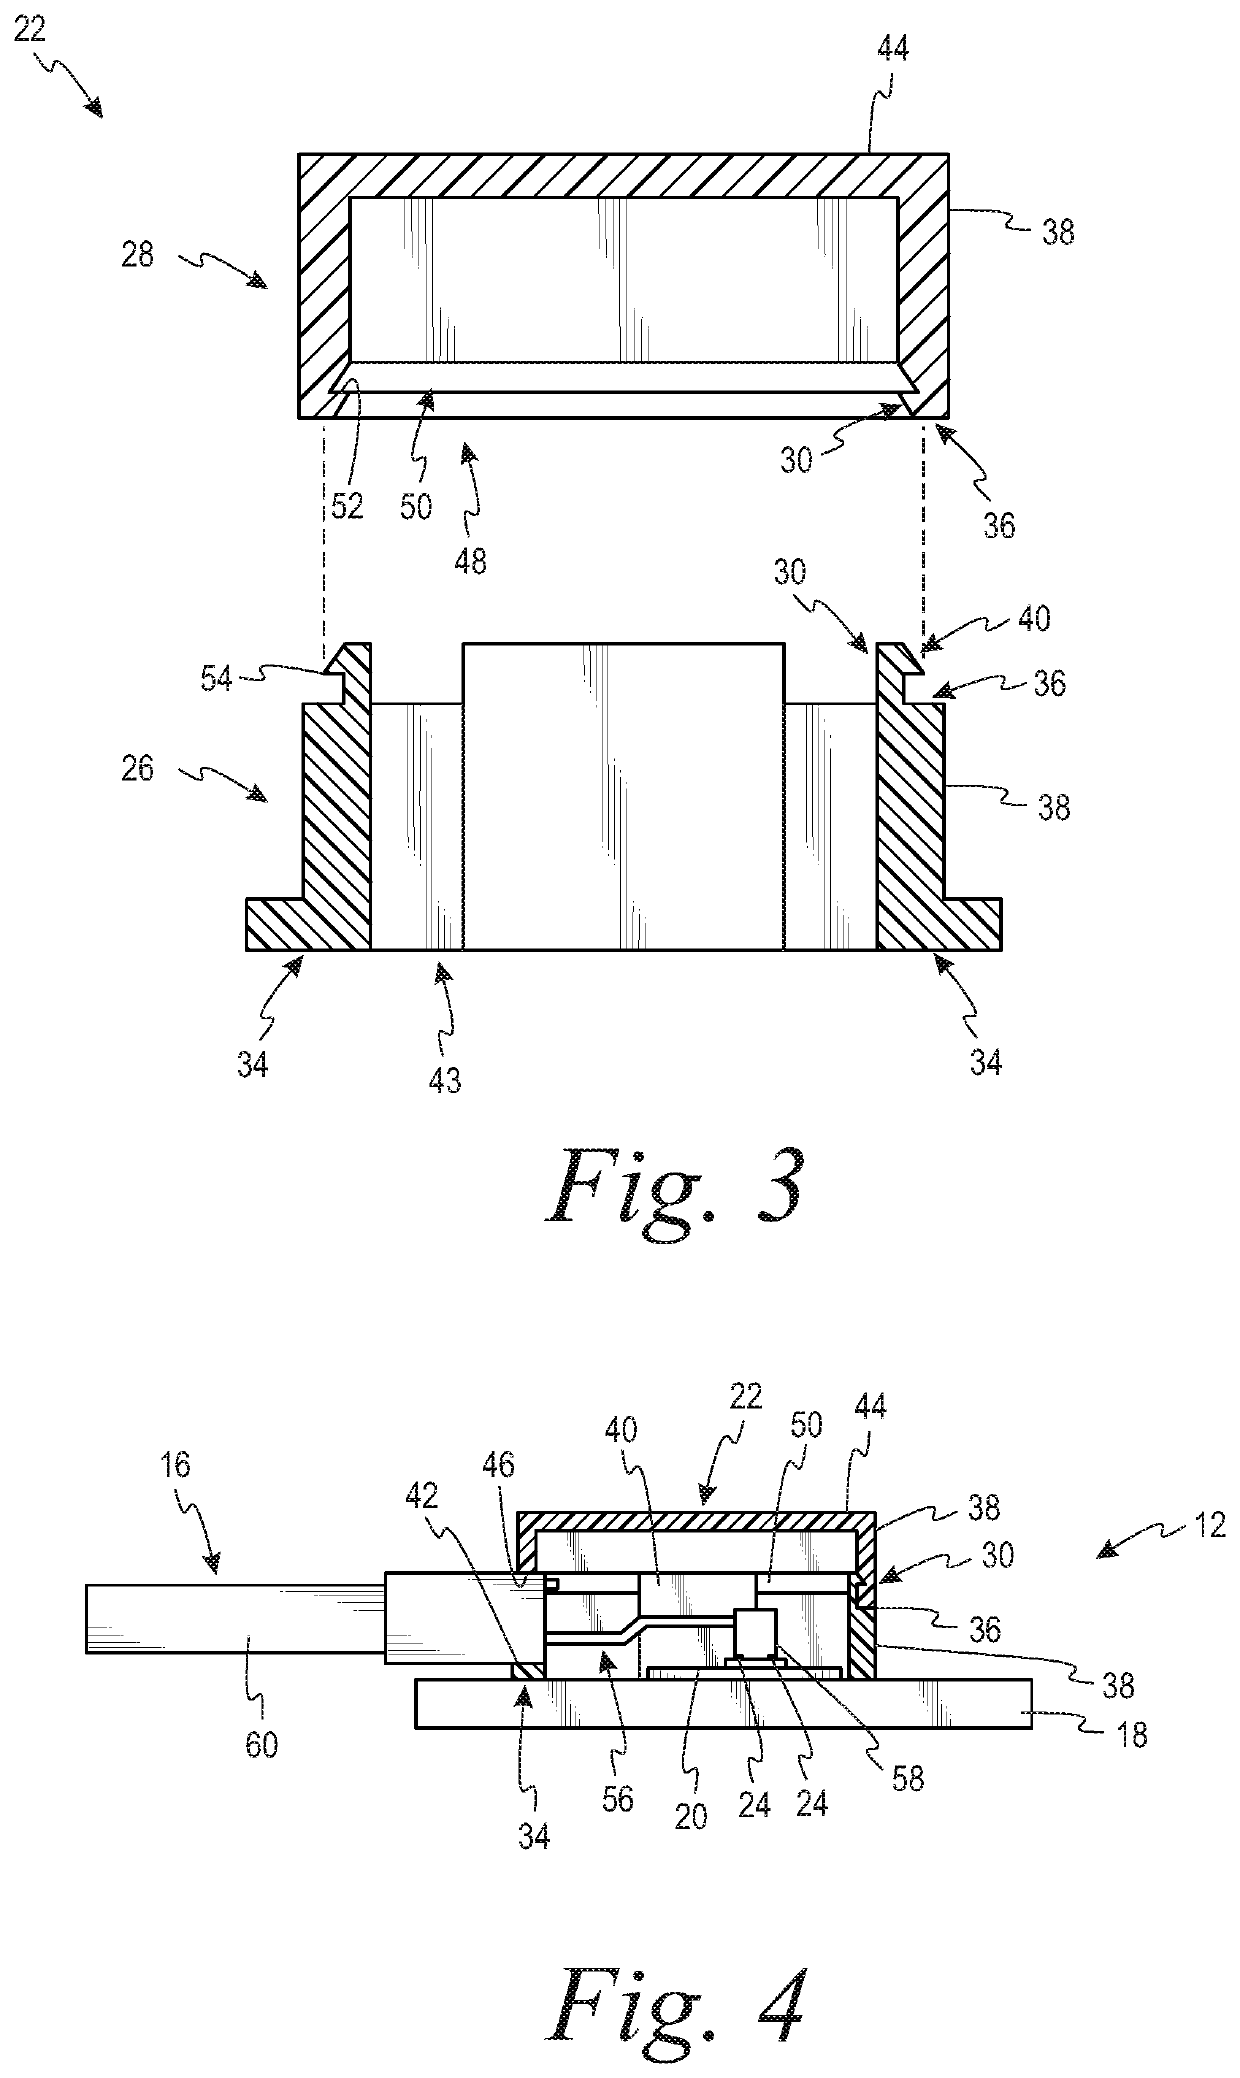 Enclosure assembly for window electrical connections